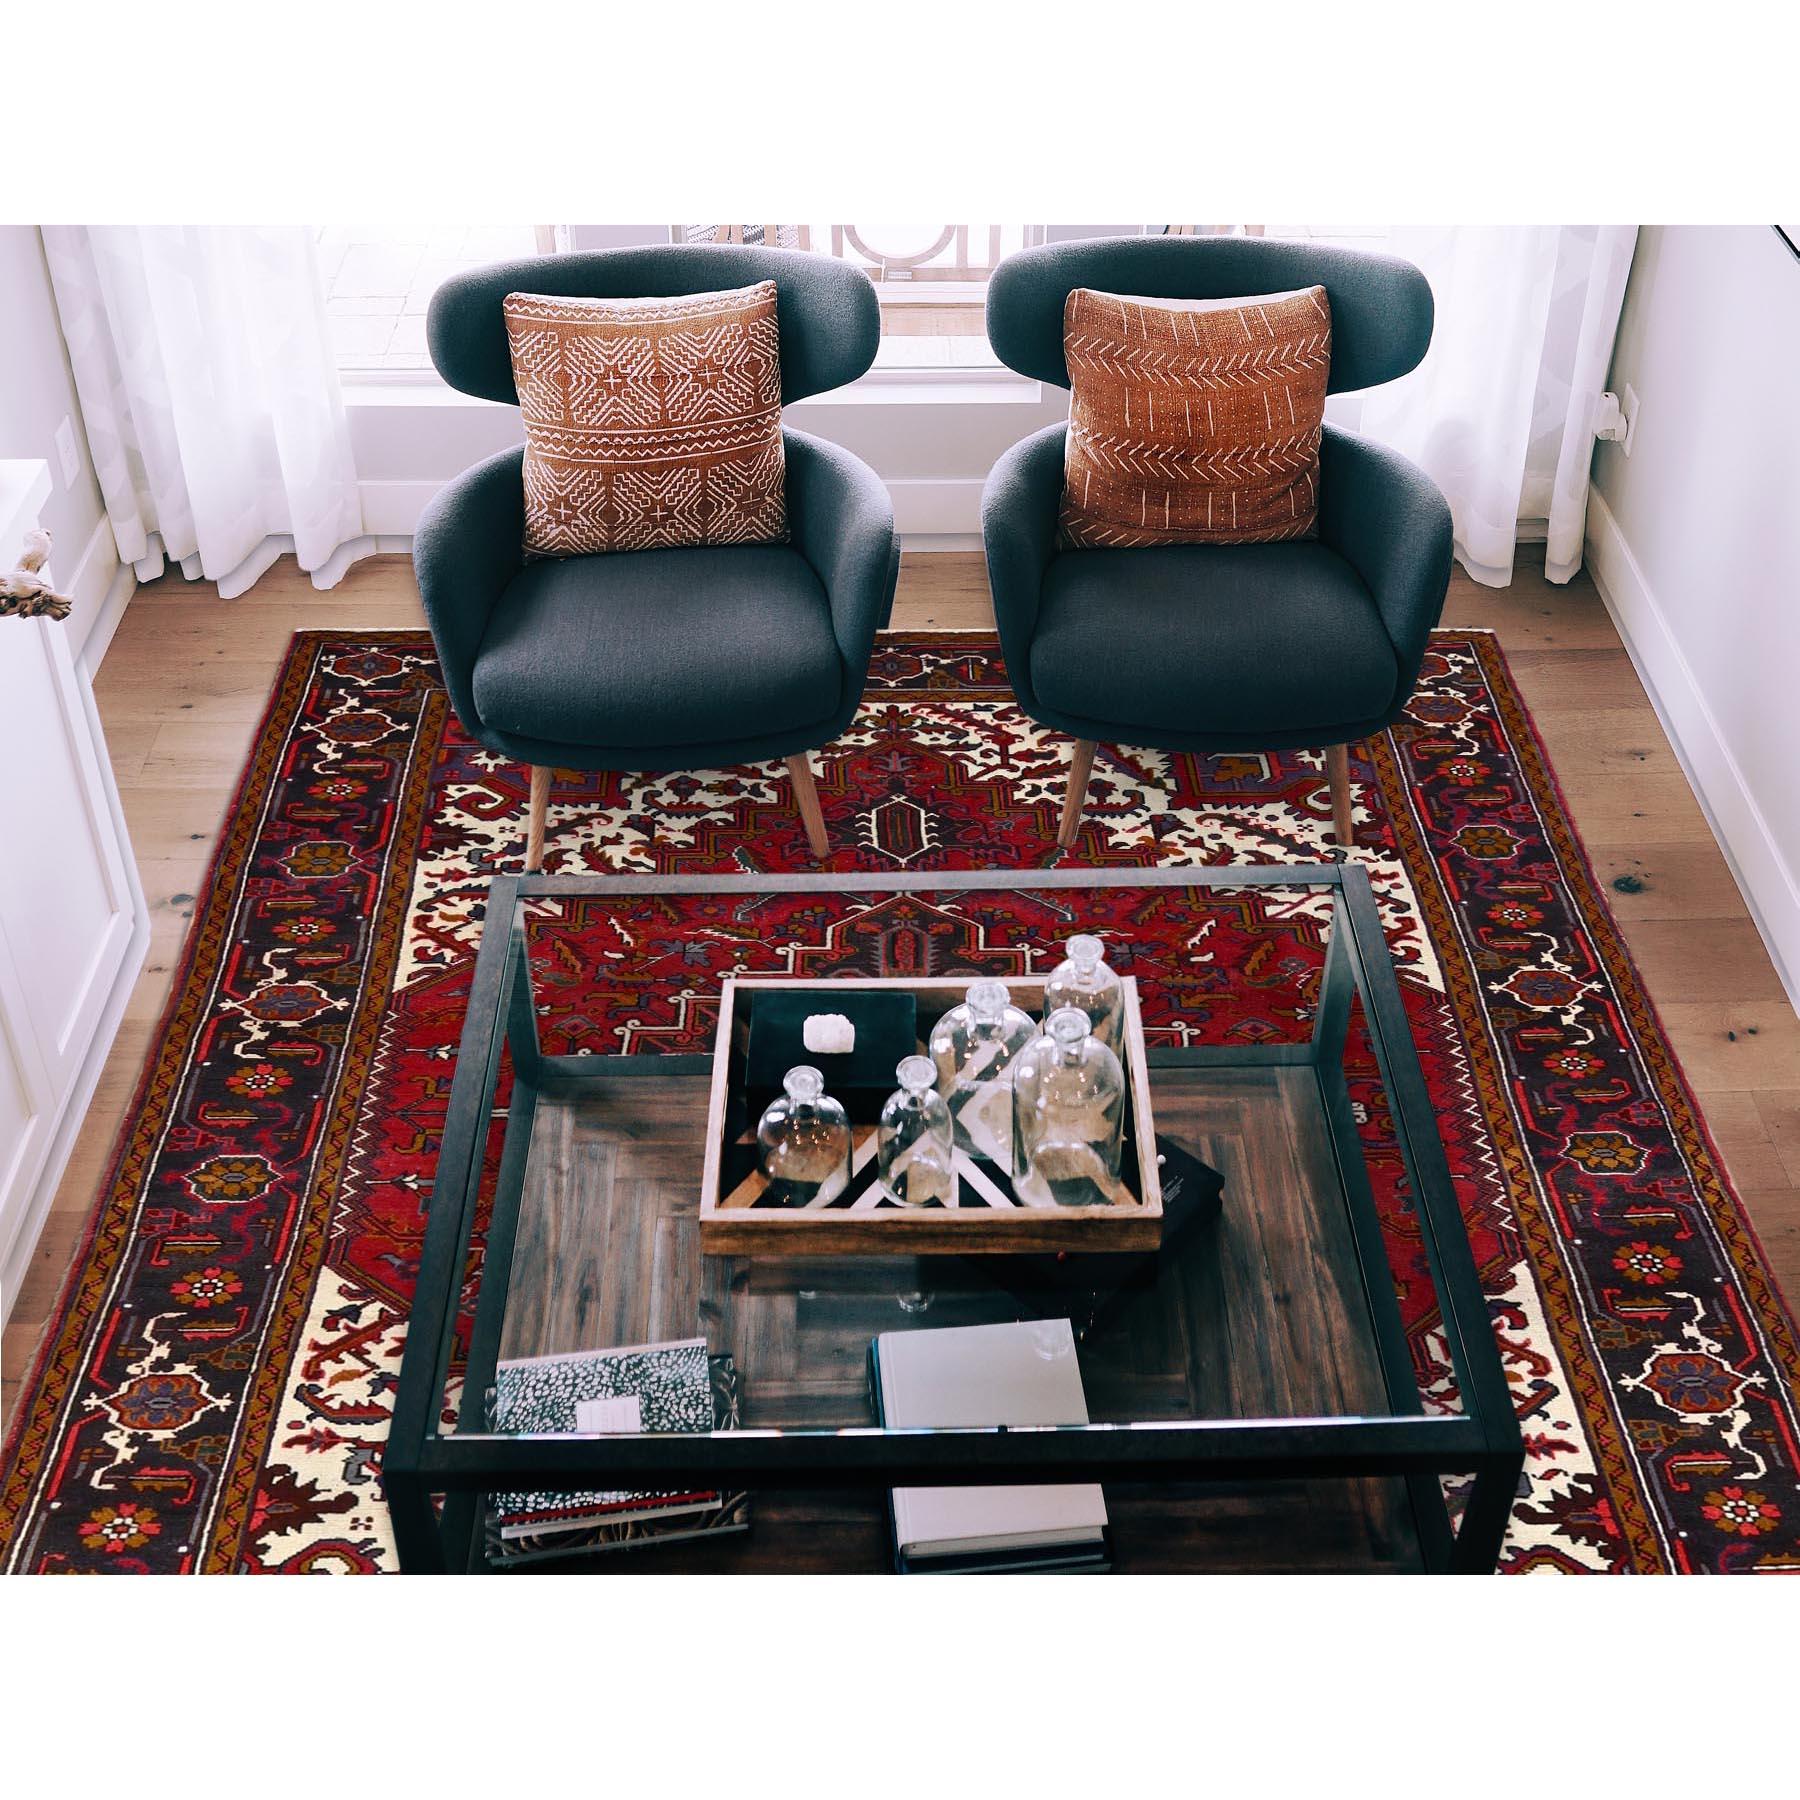 This fabulous Hand-Knotted carpet has been created and designed for extra strength and durability. This rug has been handcrafted for weeks in the traditional method that is used to make
Exact Rug Size in Feet and Inches : 6'7